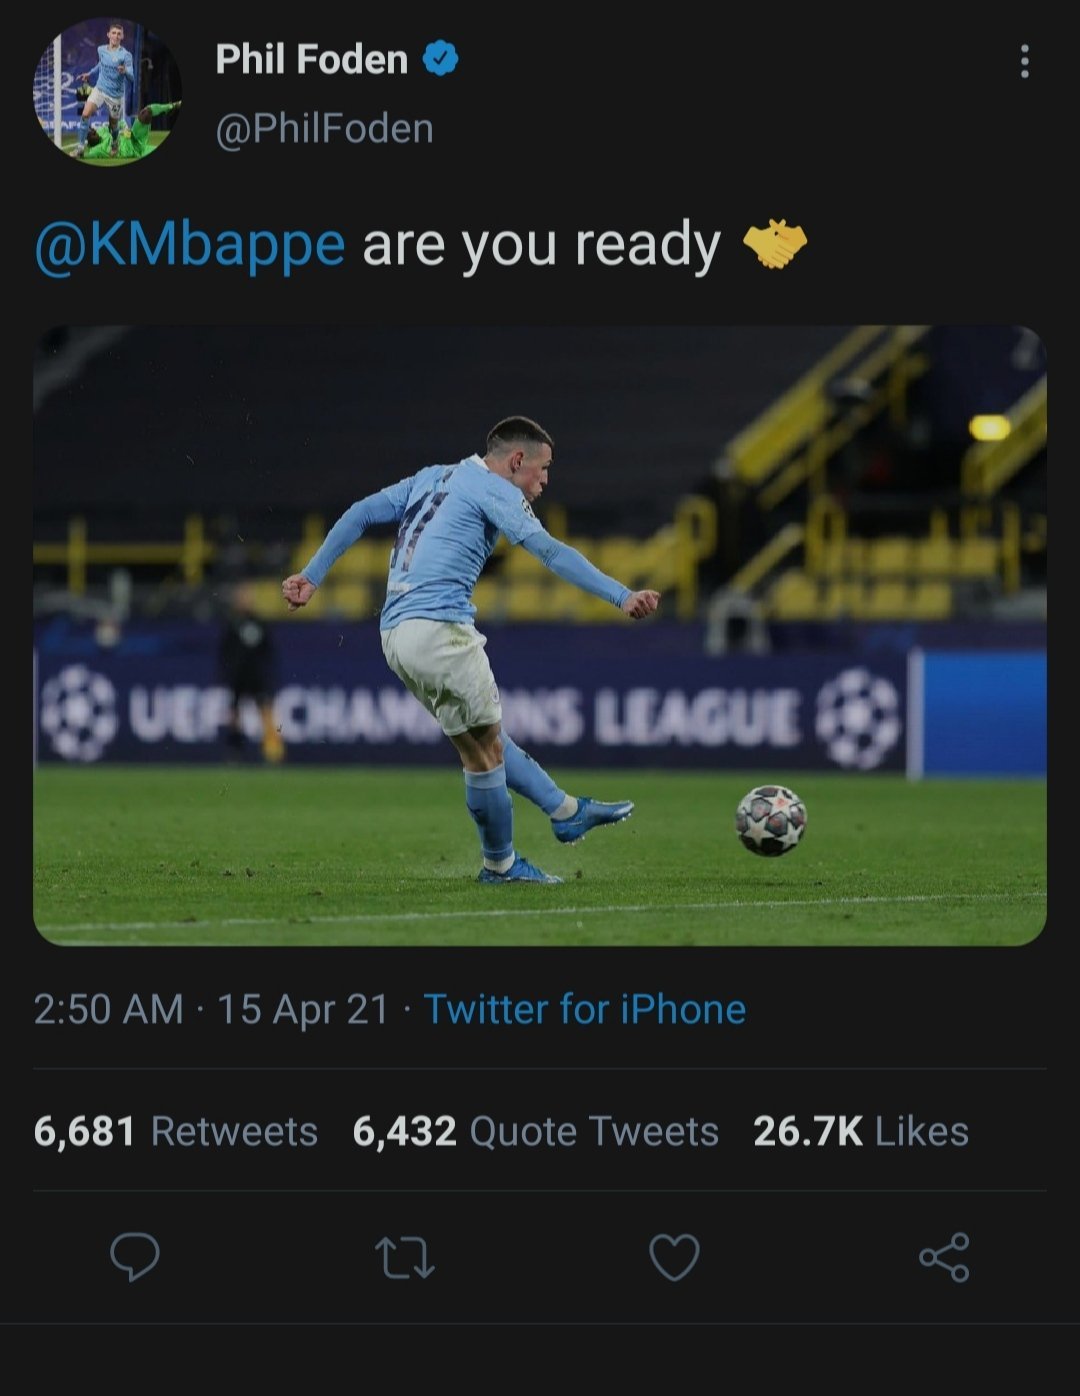 "Are you ready?" Foden asked in a tweet, in which he tagged Mbappe